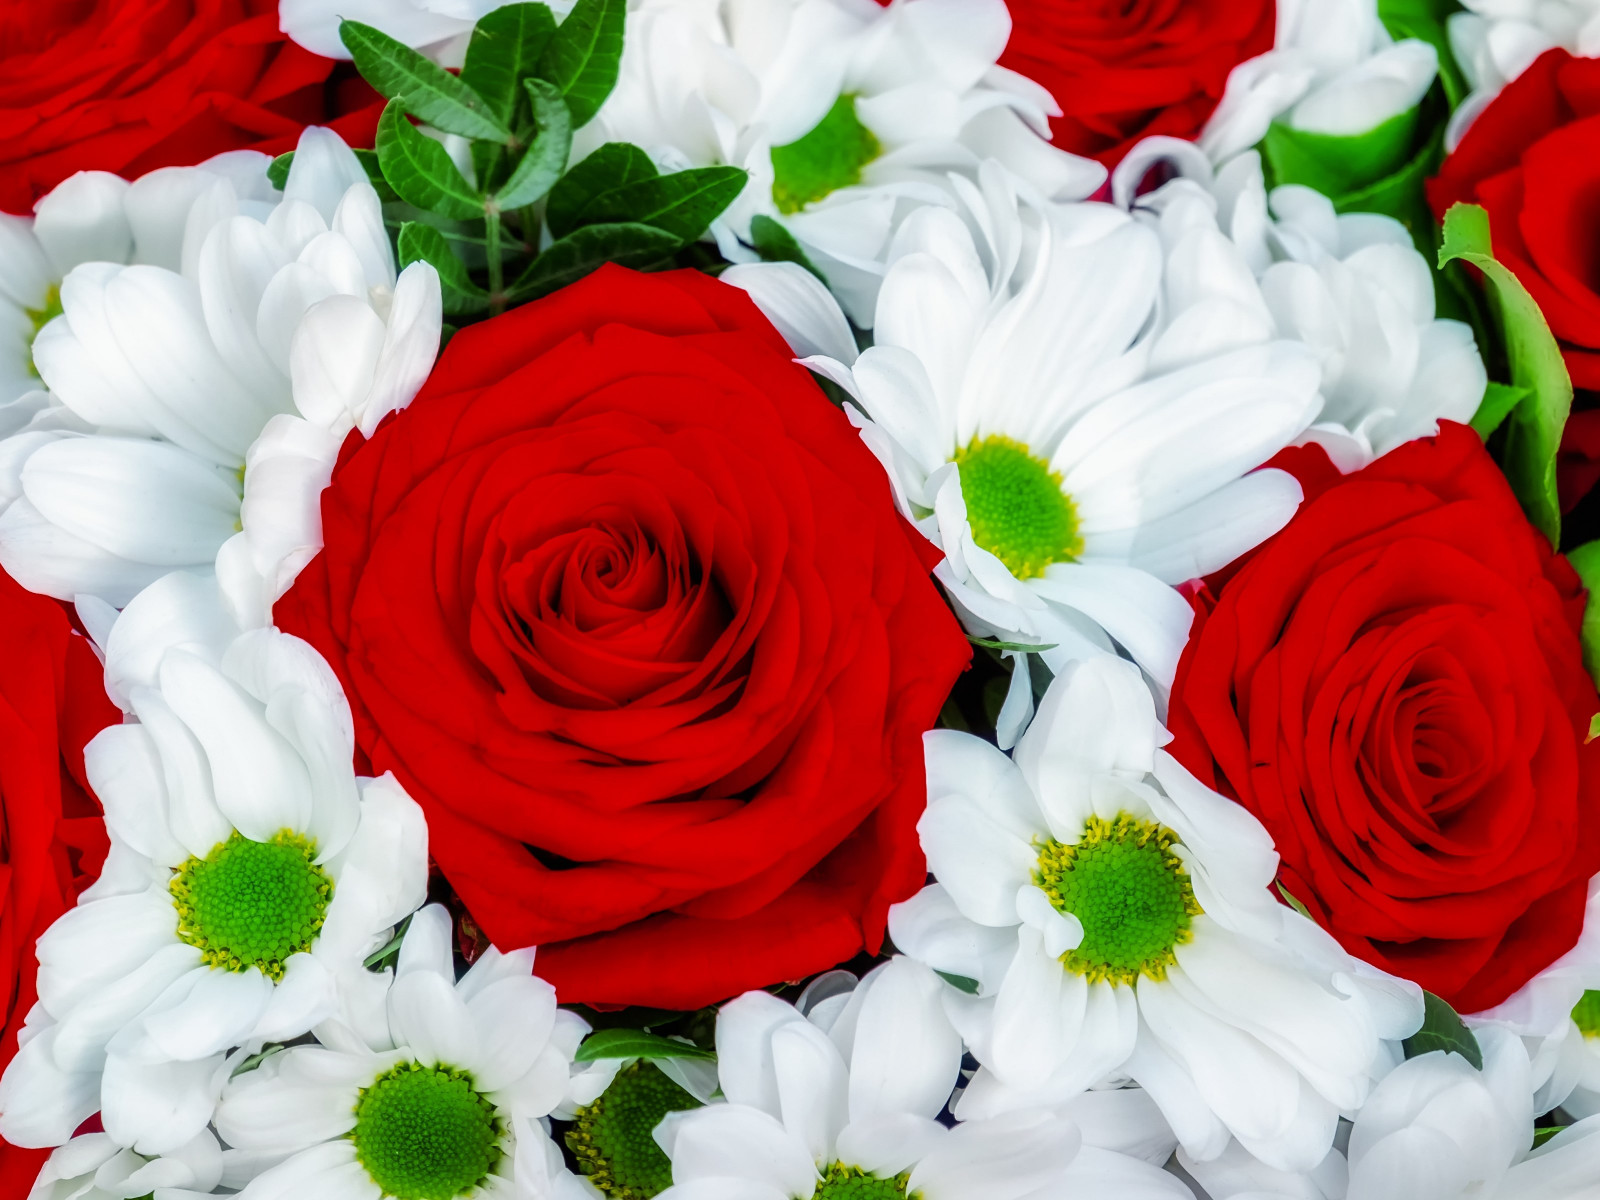 Roses and daisies bouquet wallpaper 1600x1200